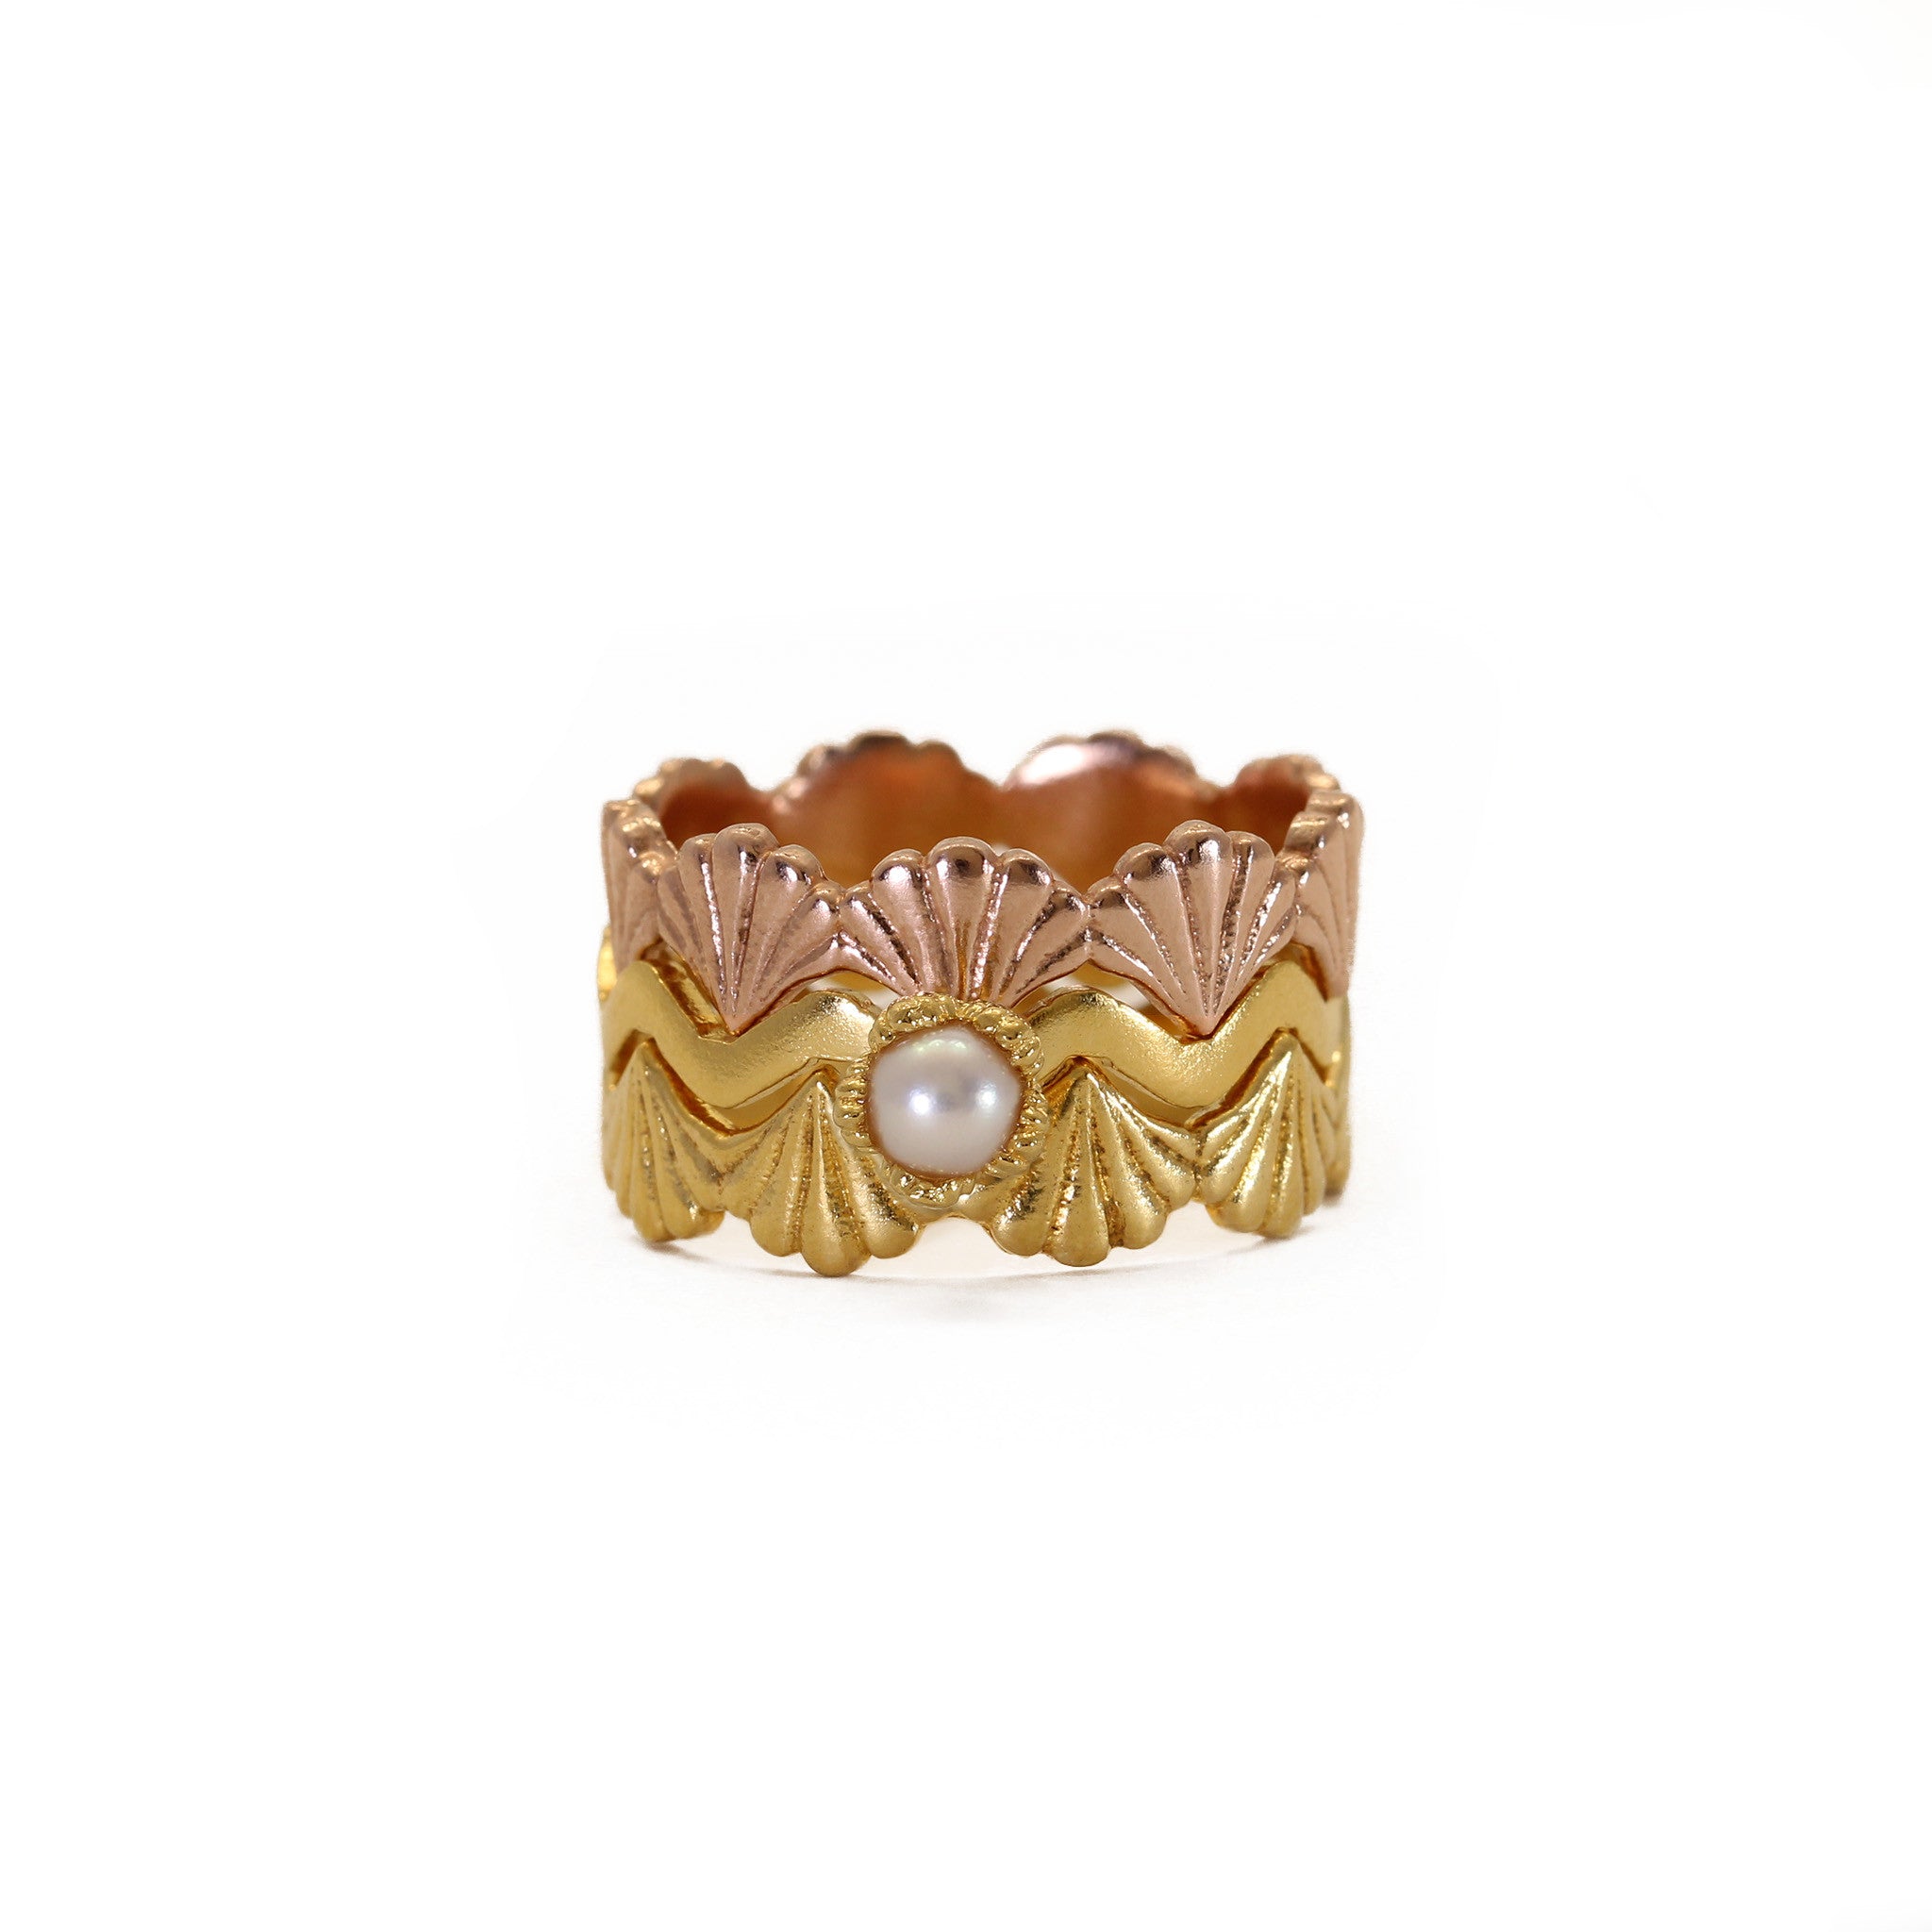 Yellow gold and rose gold stacking rings in column